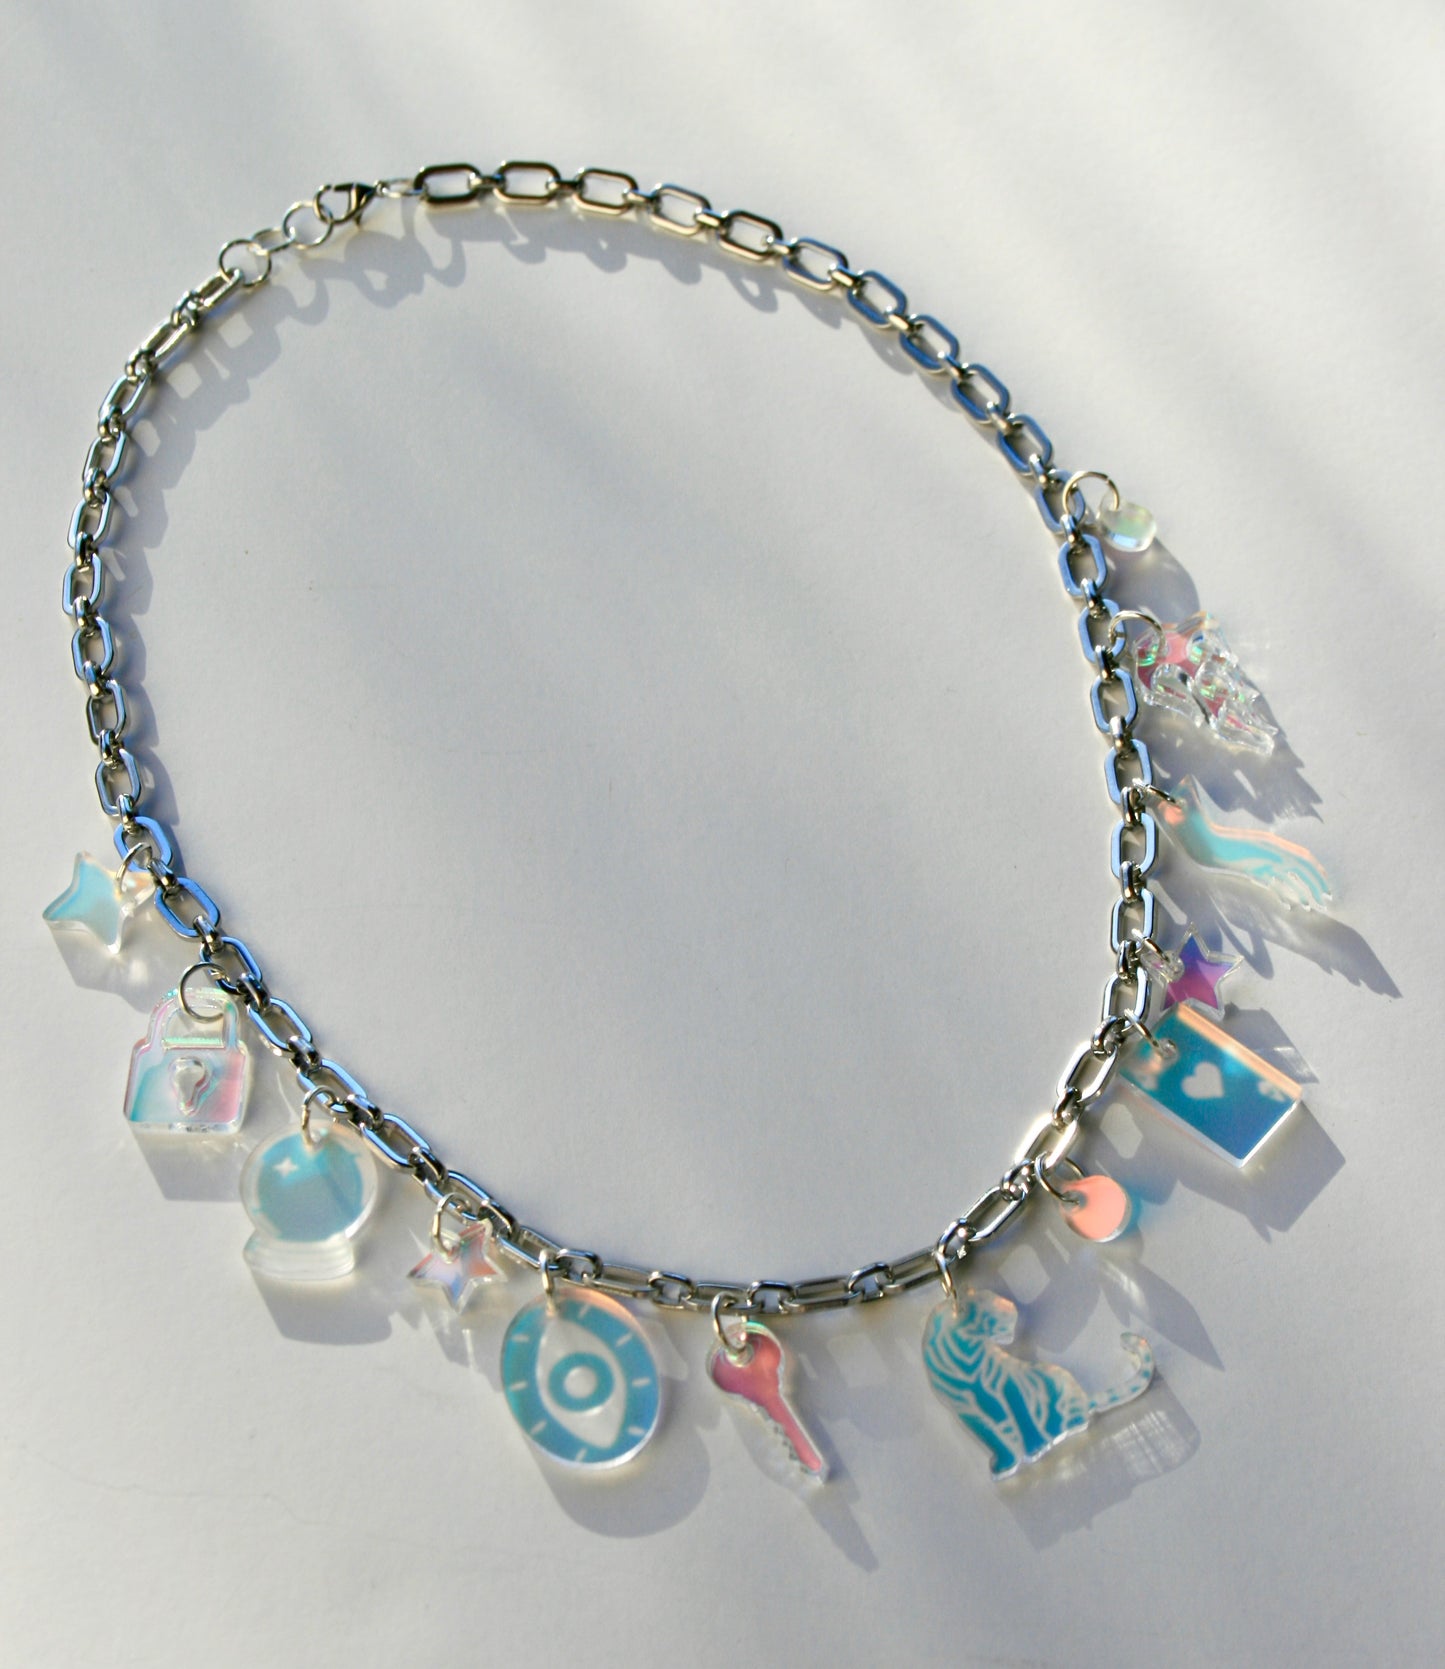 Iridescent Charm Necklace - Glitter Frosted Holo OOAK One of a Kind Detailed